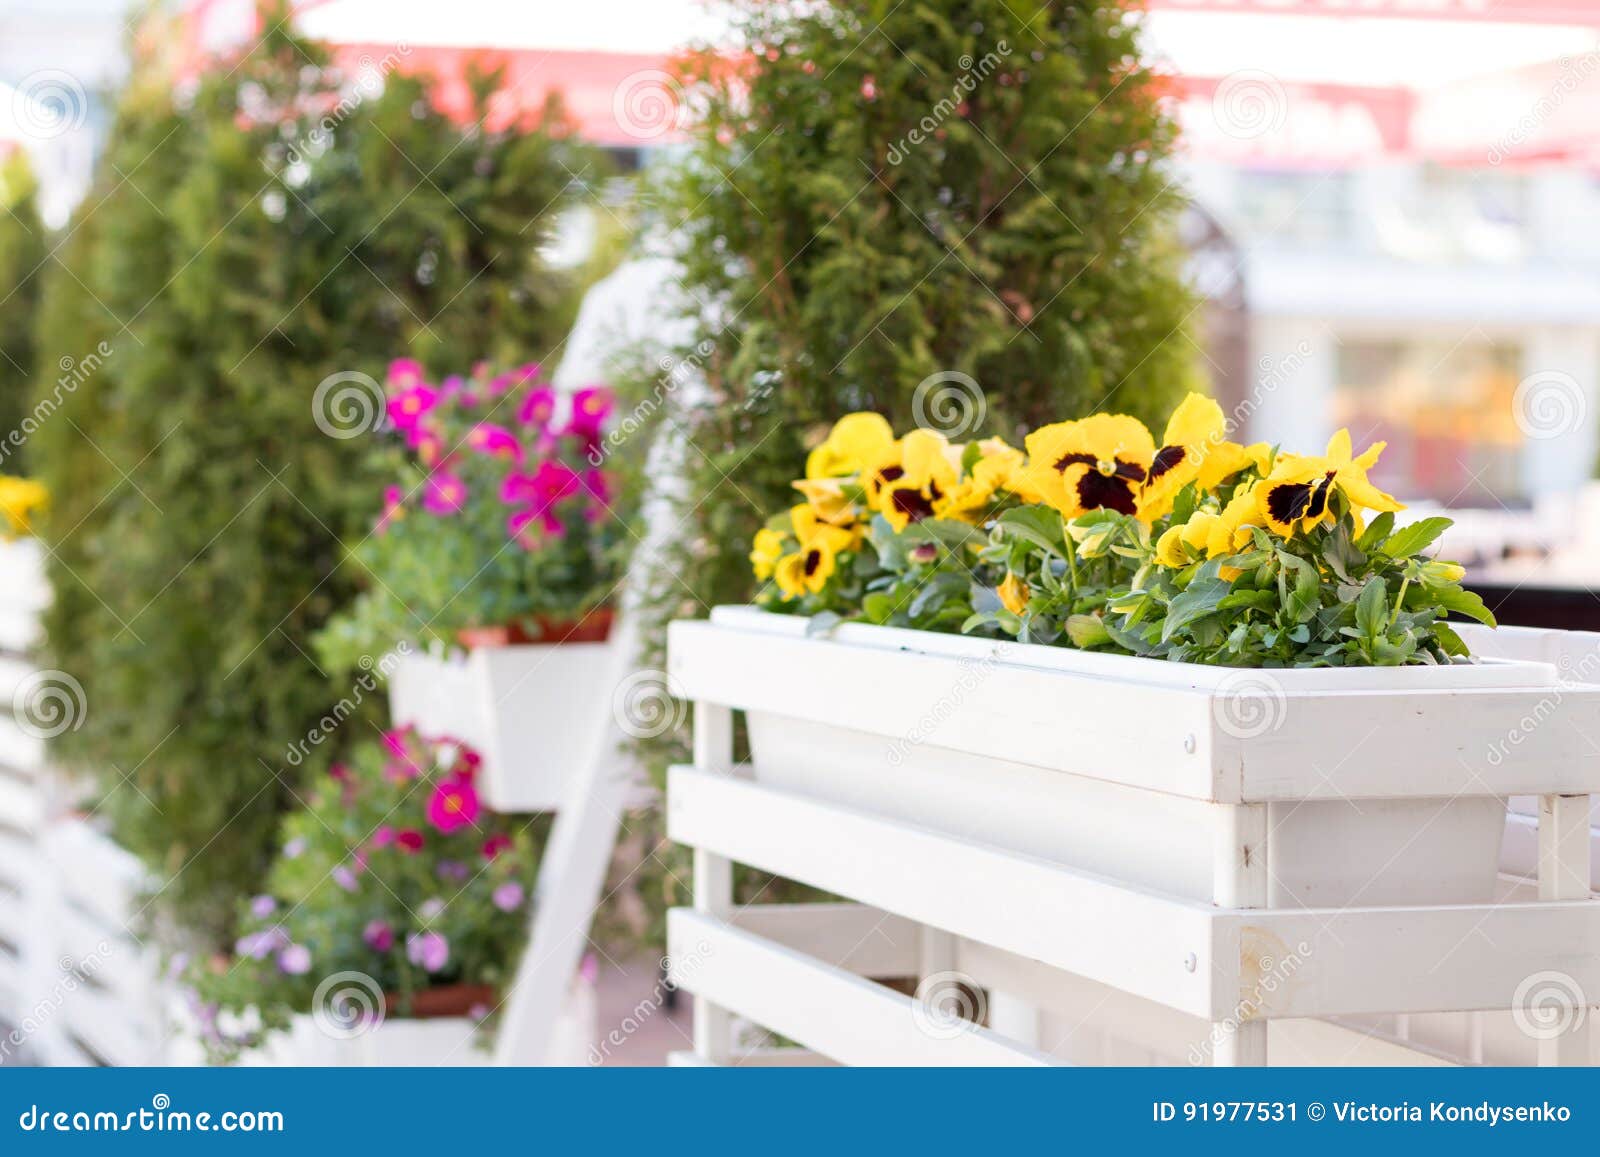 Street Cafe Flowers and Herbs Decor Concept. Stock Image - Image of ...